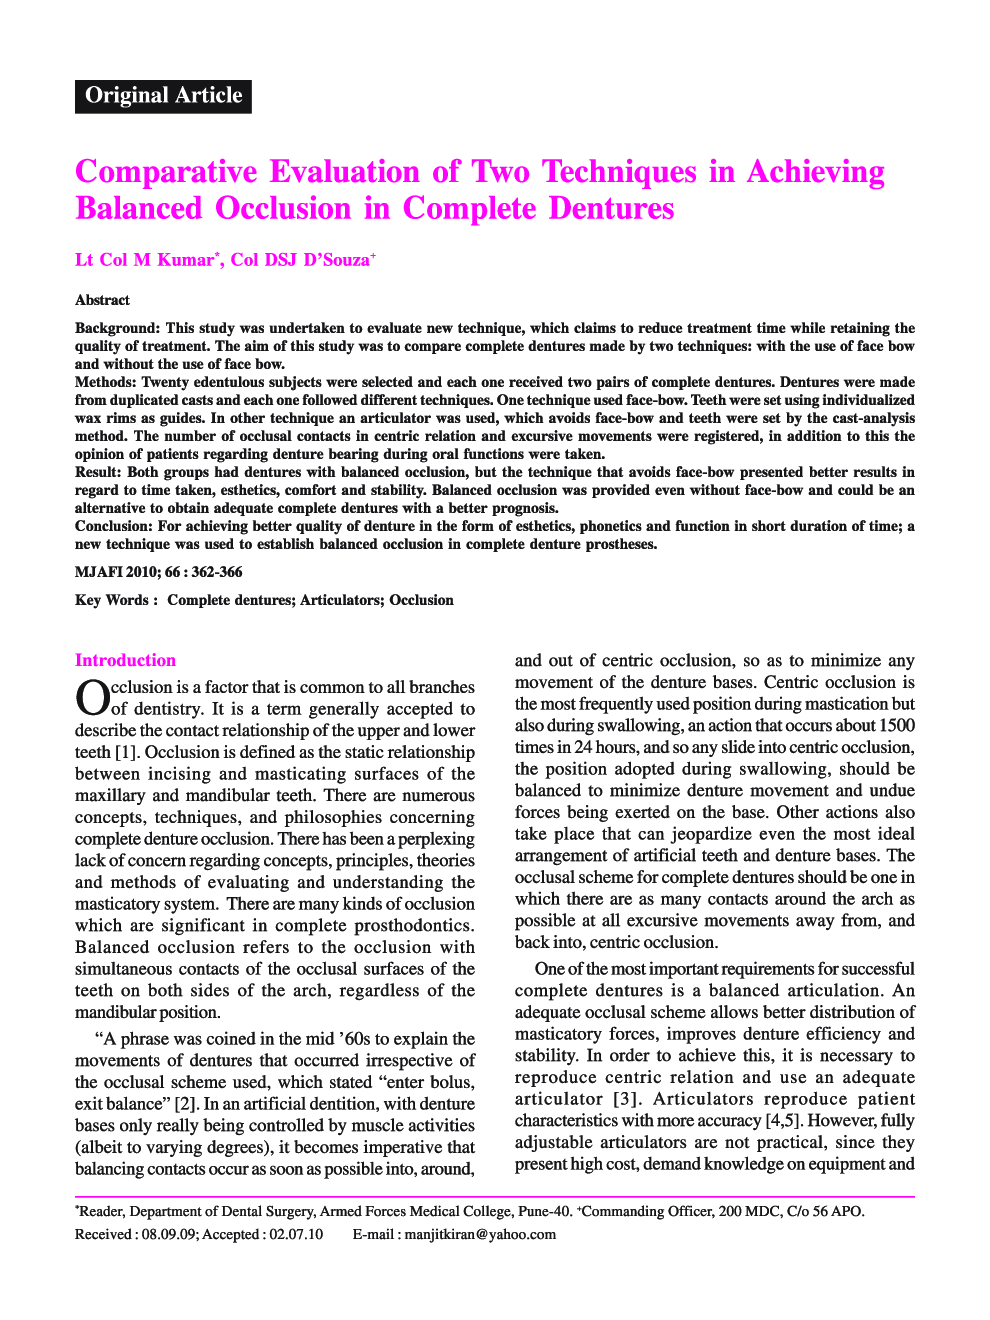 Comparative Evaluation of Two Techniques in Achieving Balanced Occlusion in Complete Dentures